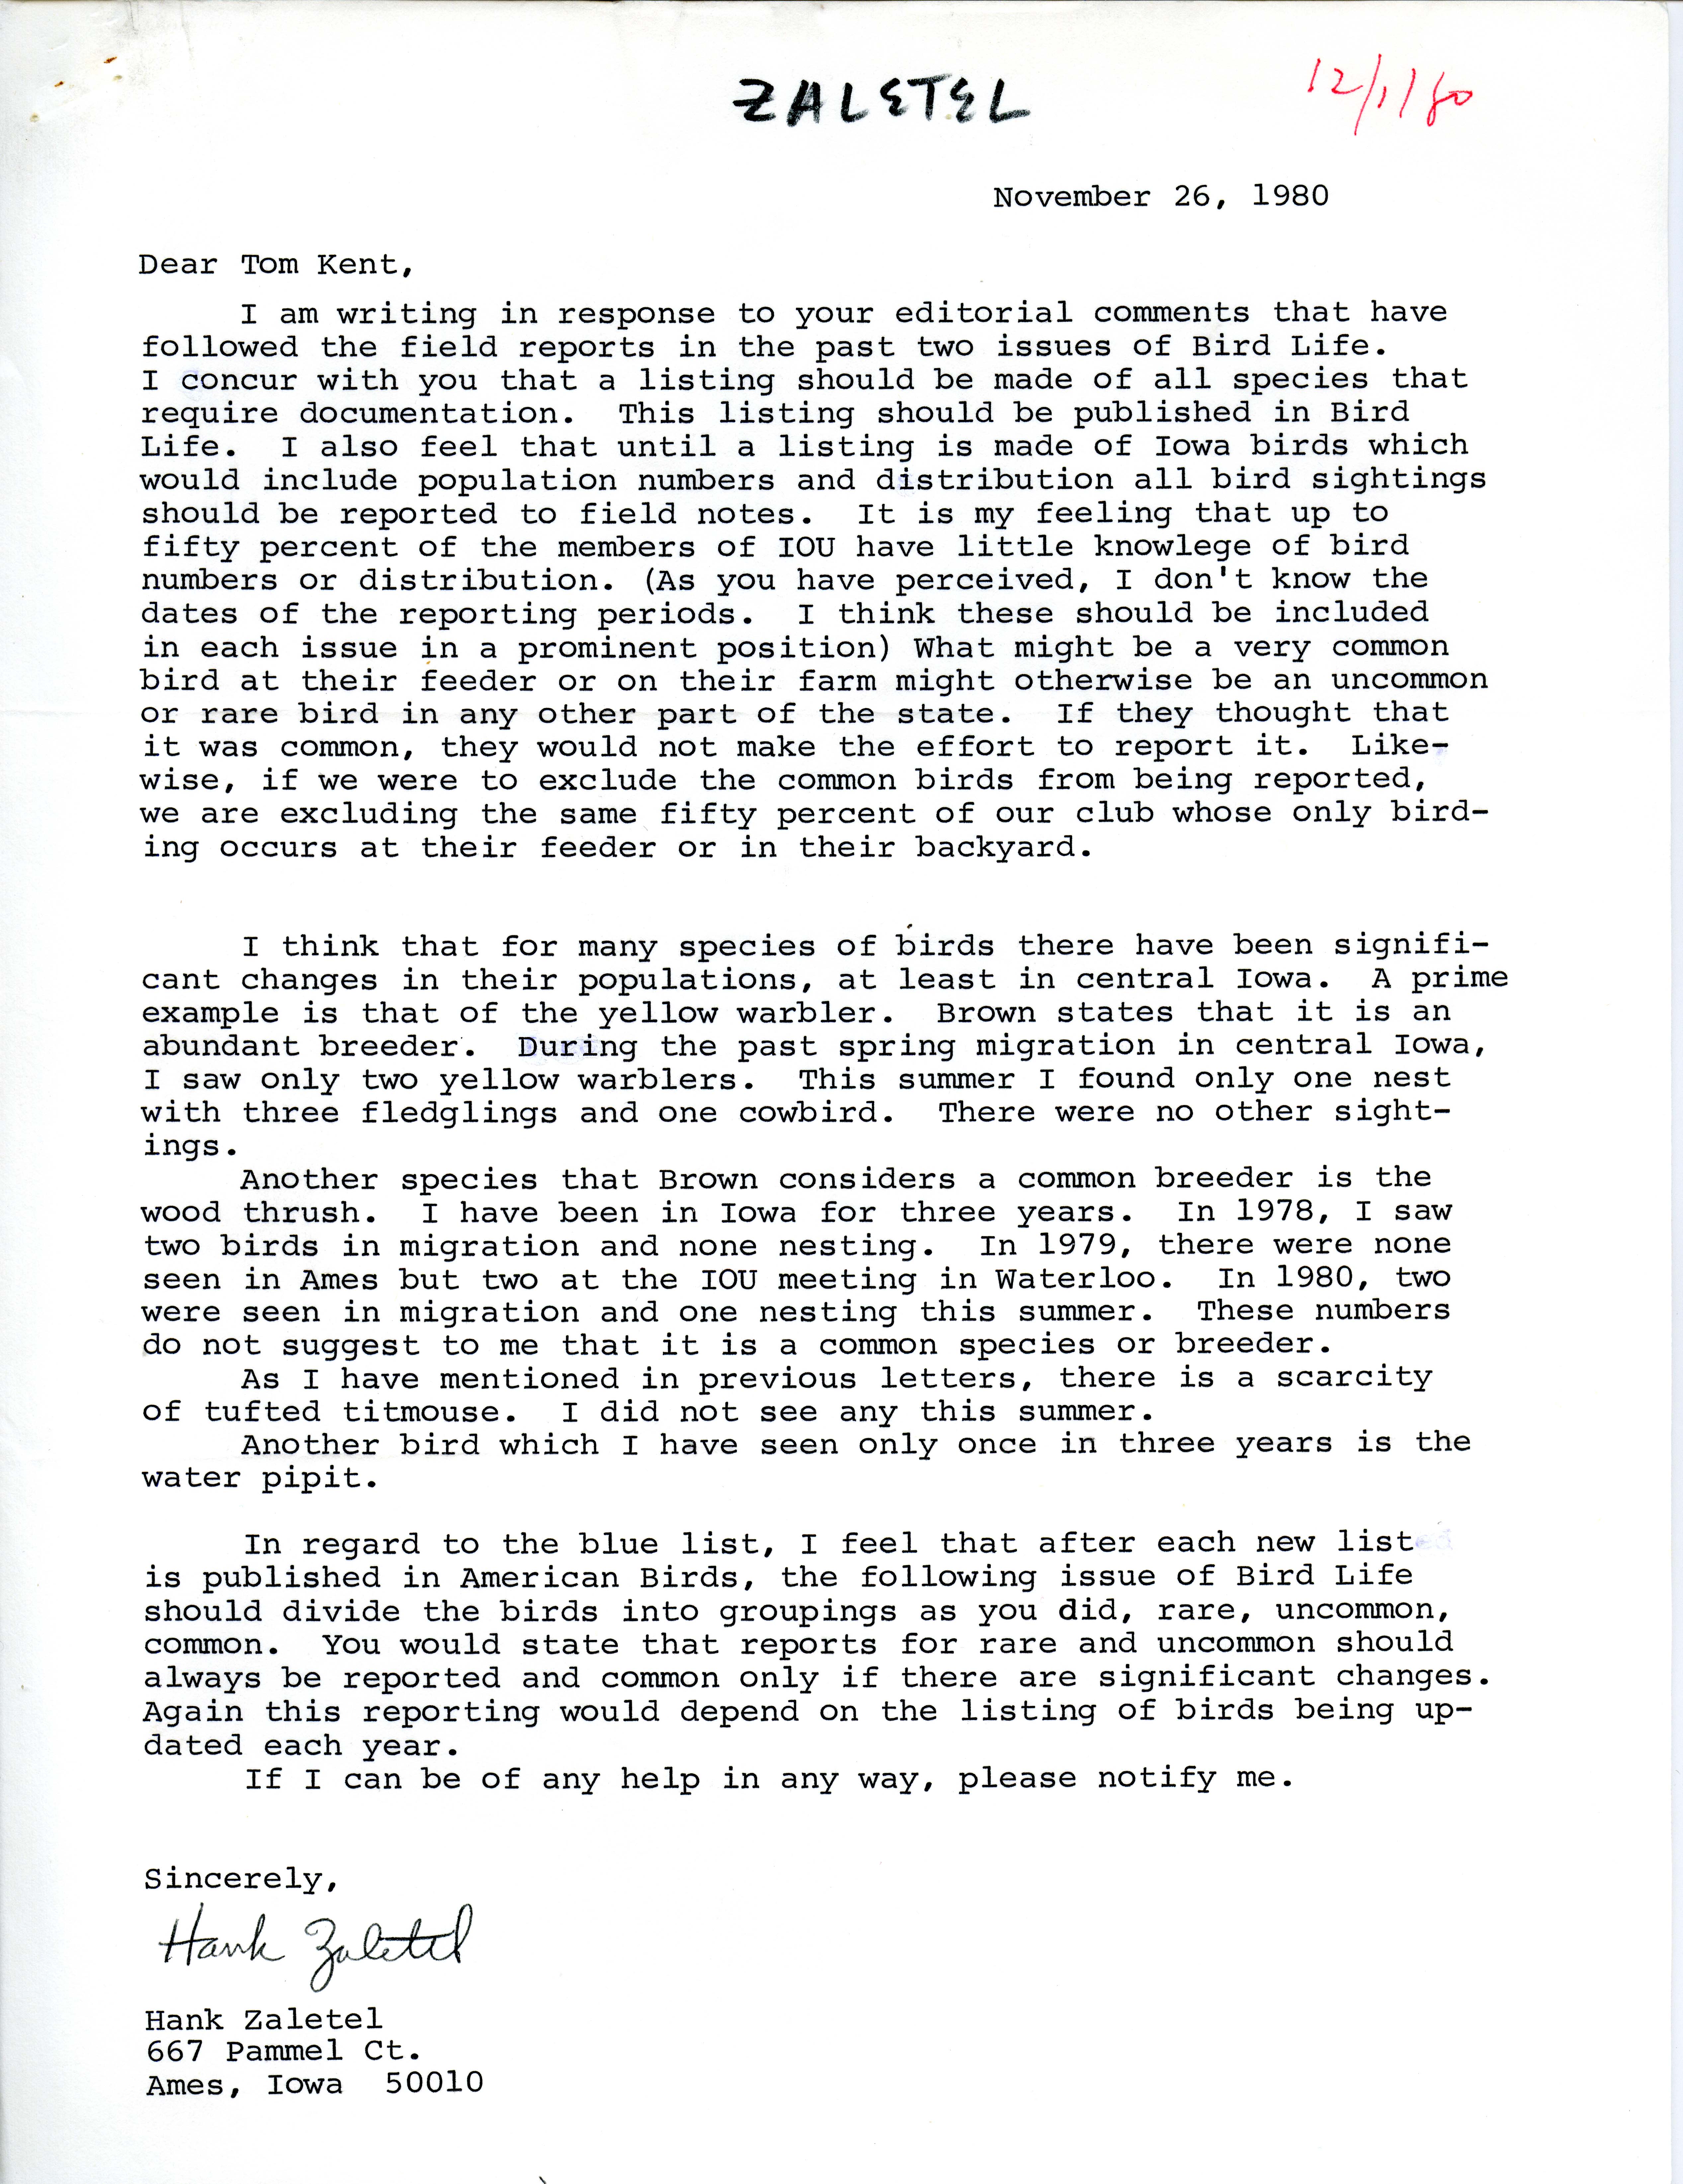 Hank Zaletel letter to Thomas Kent regarding editorial comments to field reports, November 26, 1980